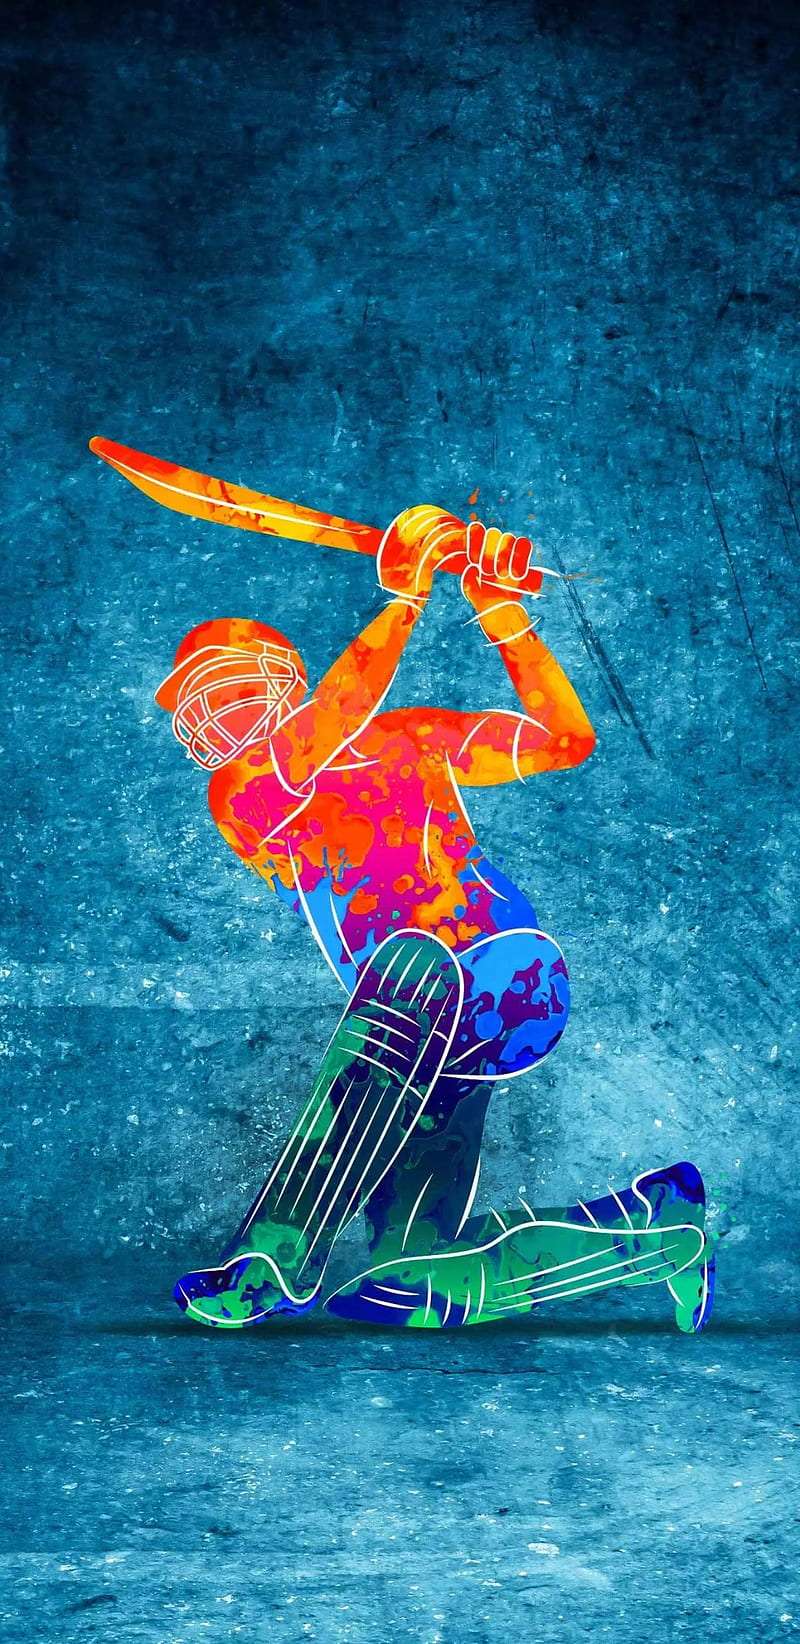 Cricket wallpaper for iphone 14 4